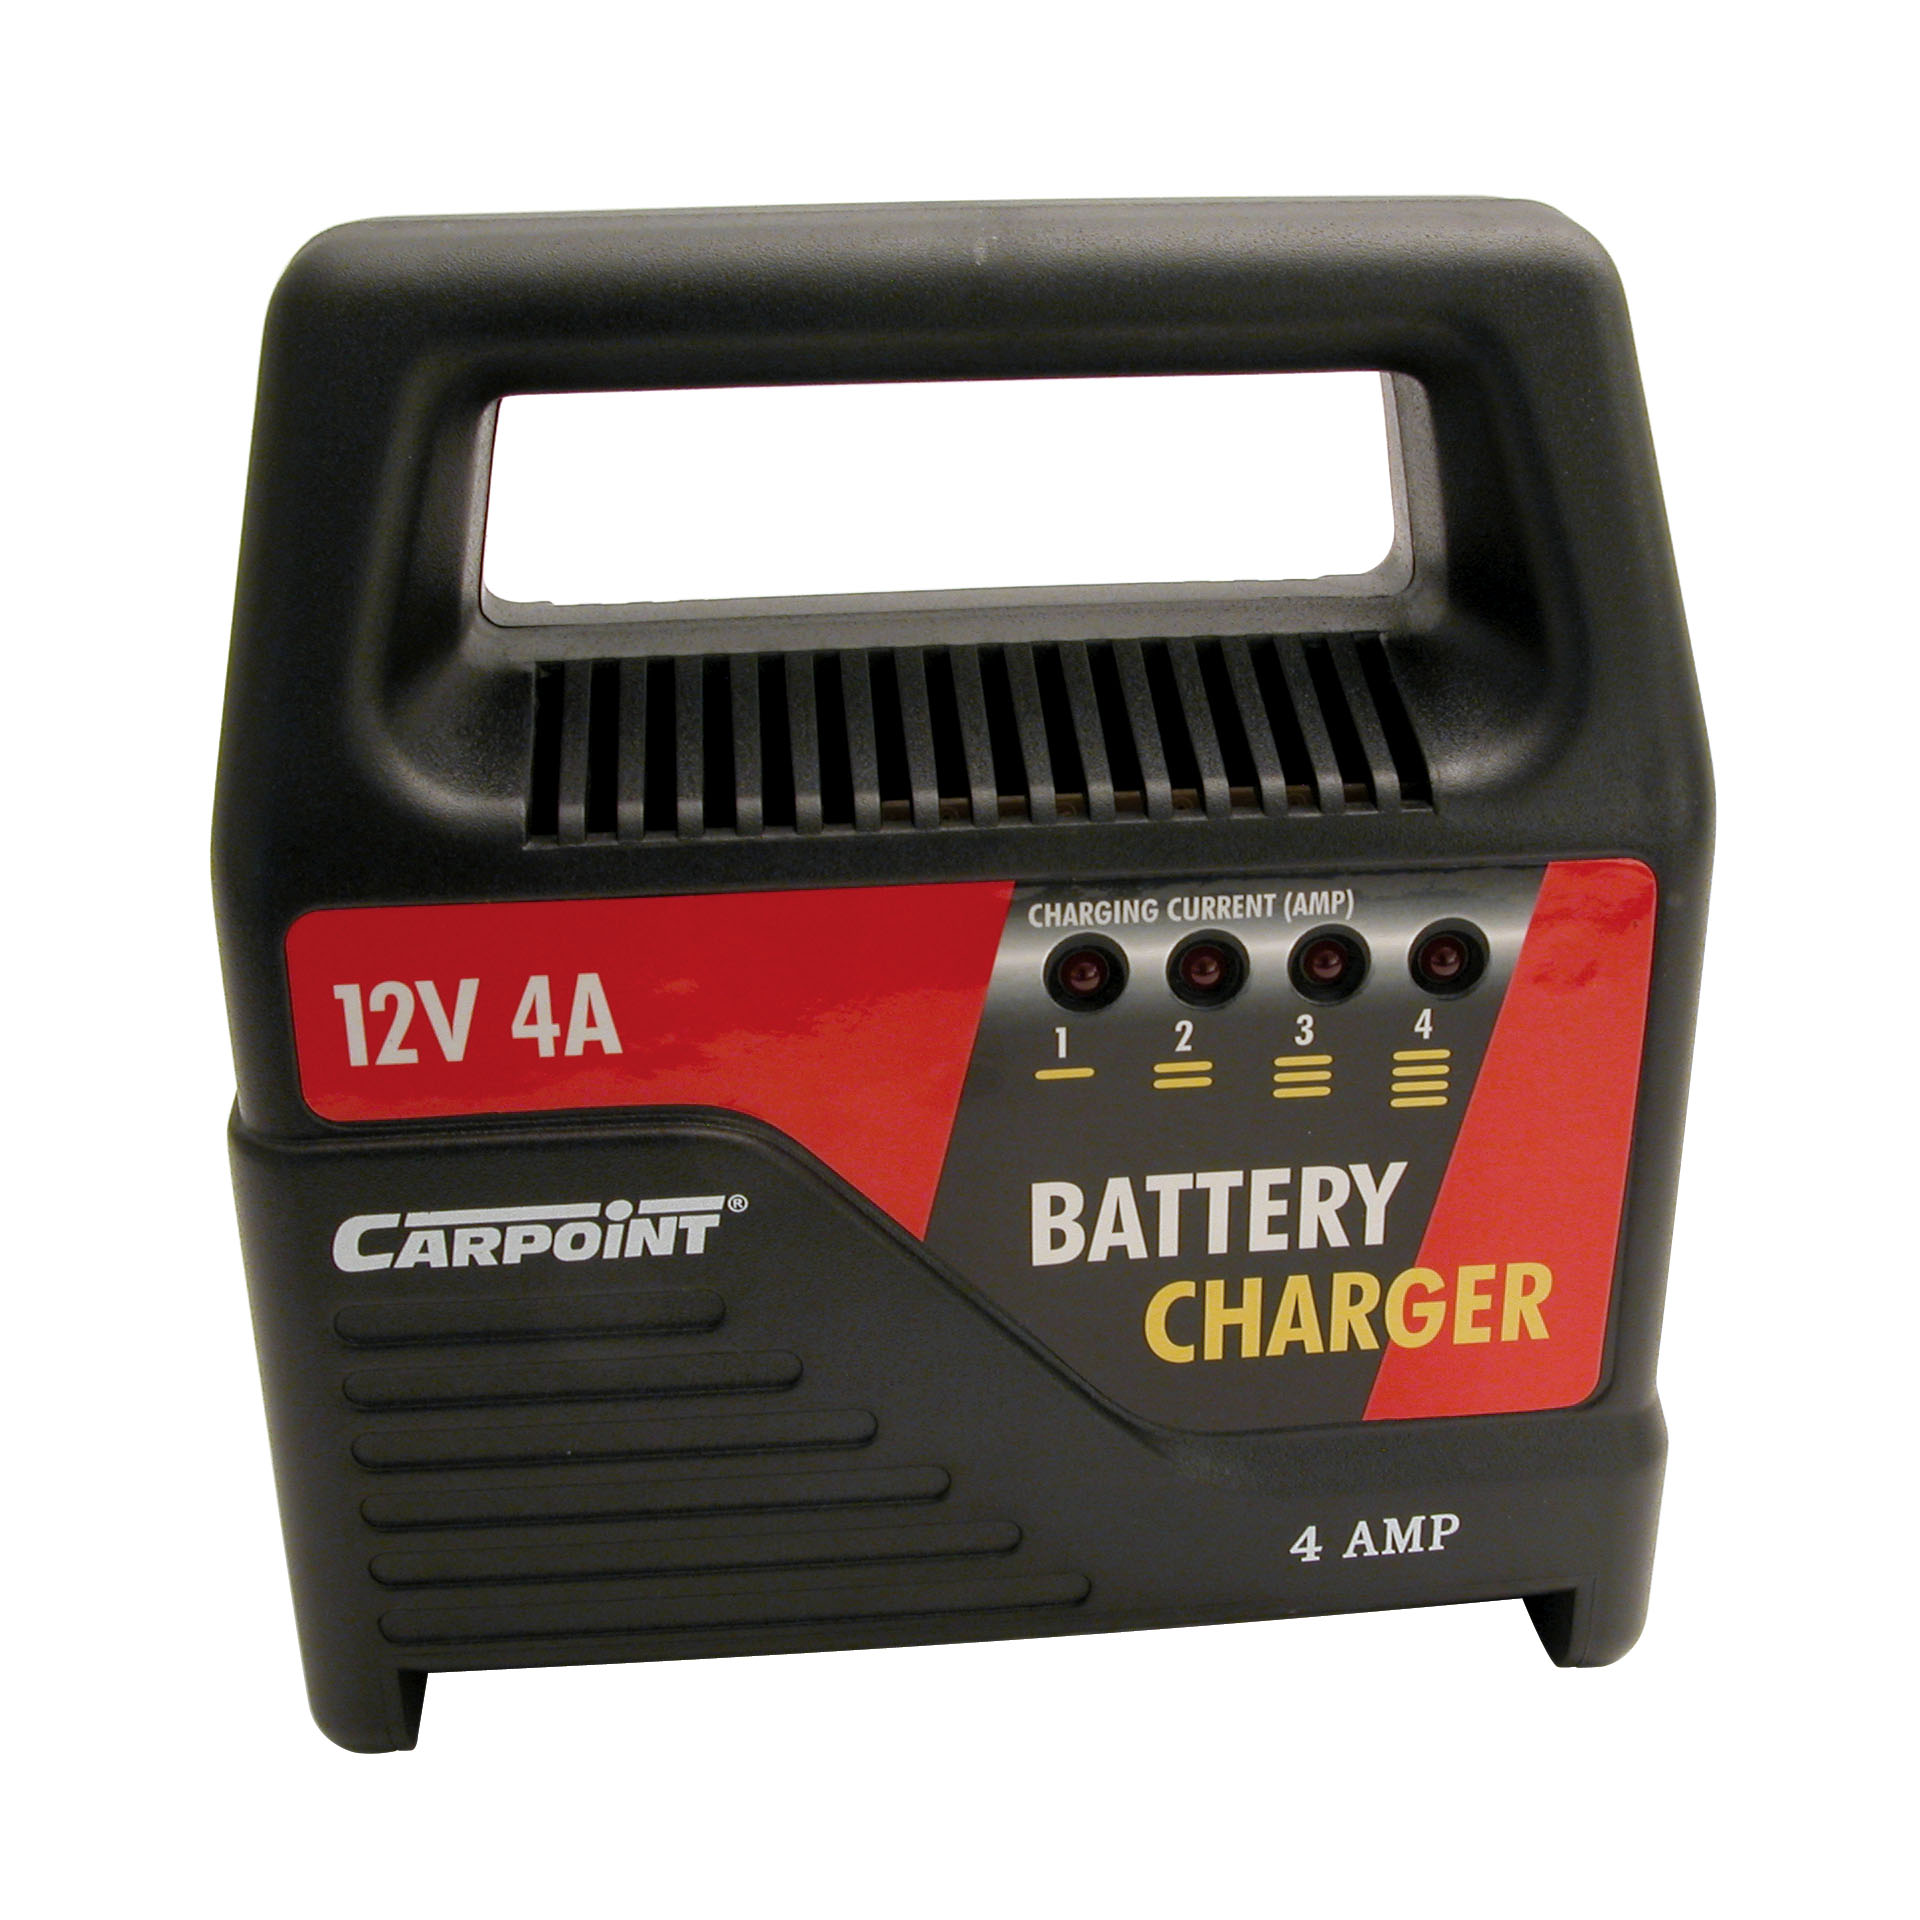 Battery current. Carpoint Battery Charger Automatic 12a 6v/12v. Carpoint зарядное устройство 6-12в. Car Battery Charger 12v 100a. Battery Charger crx312.